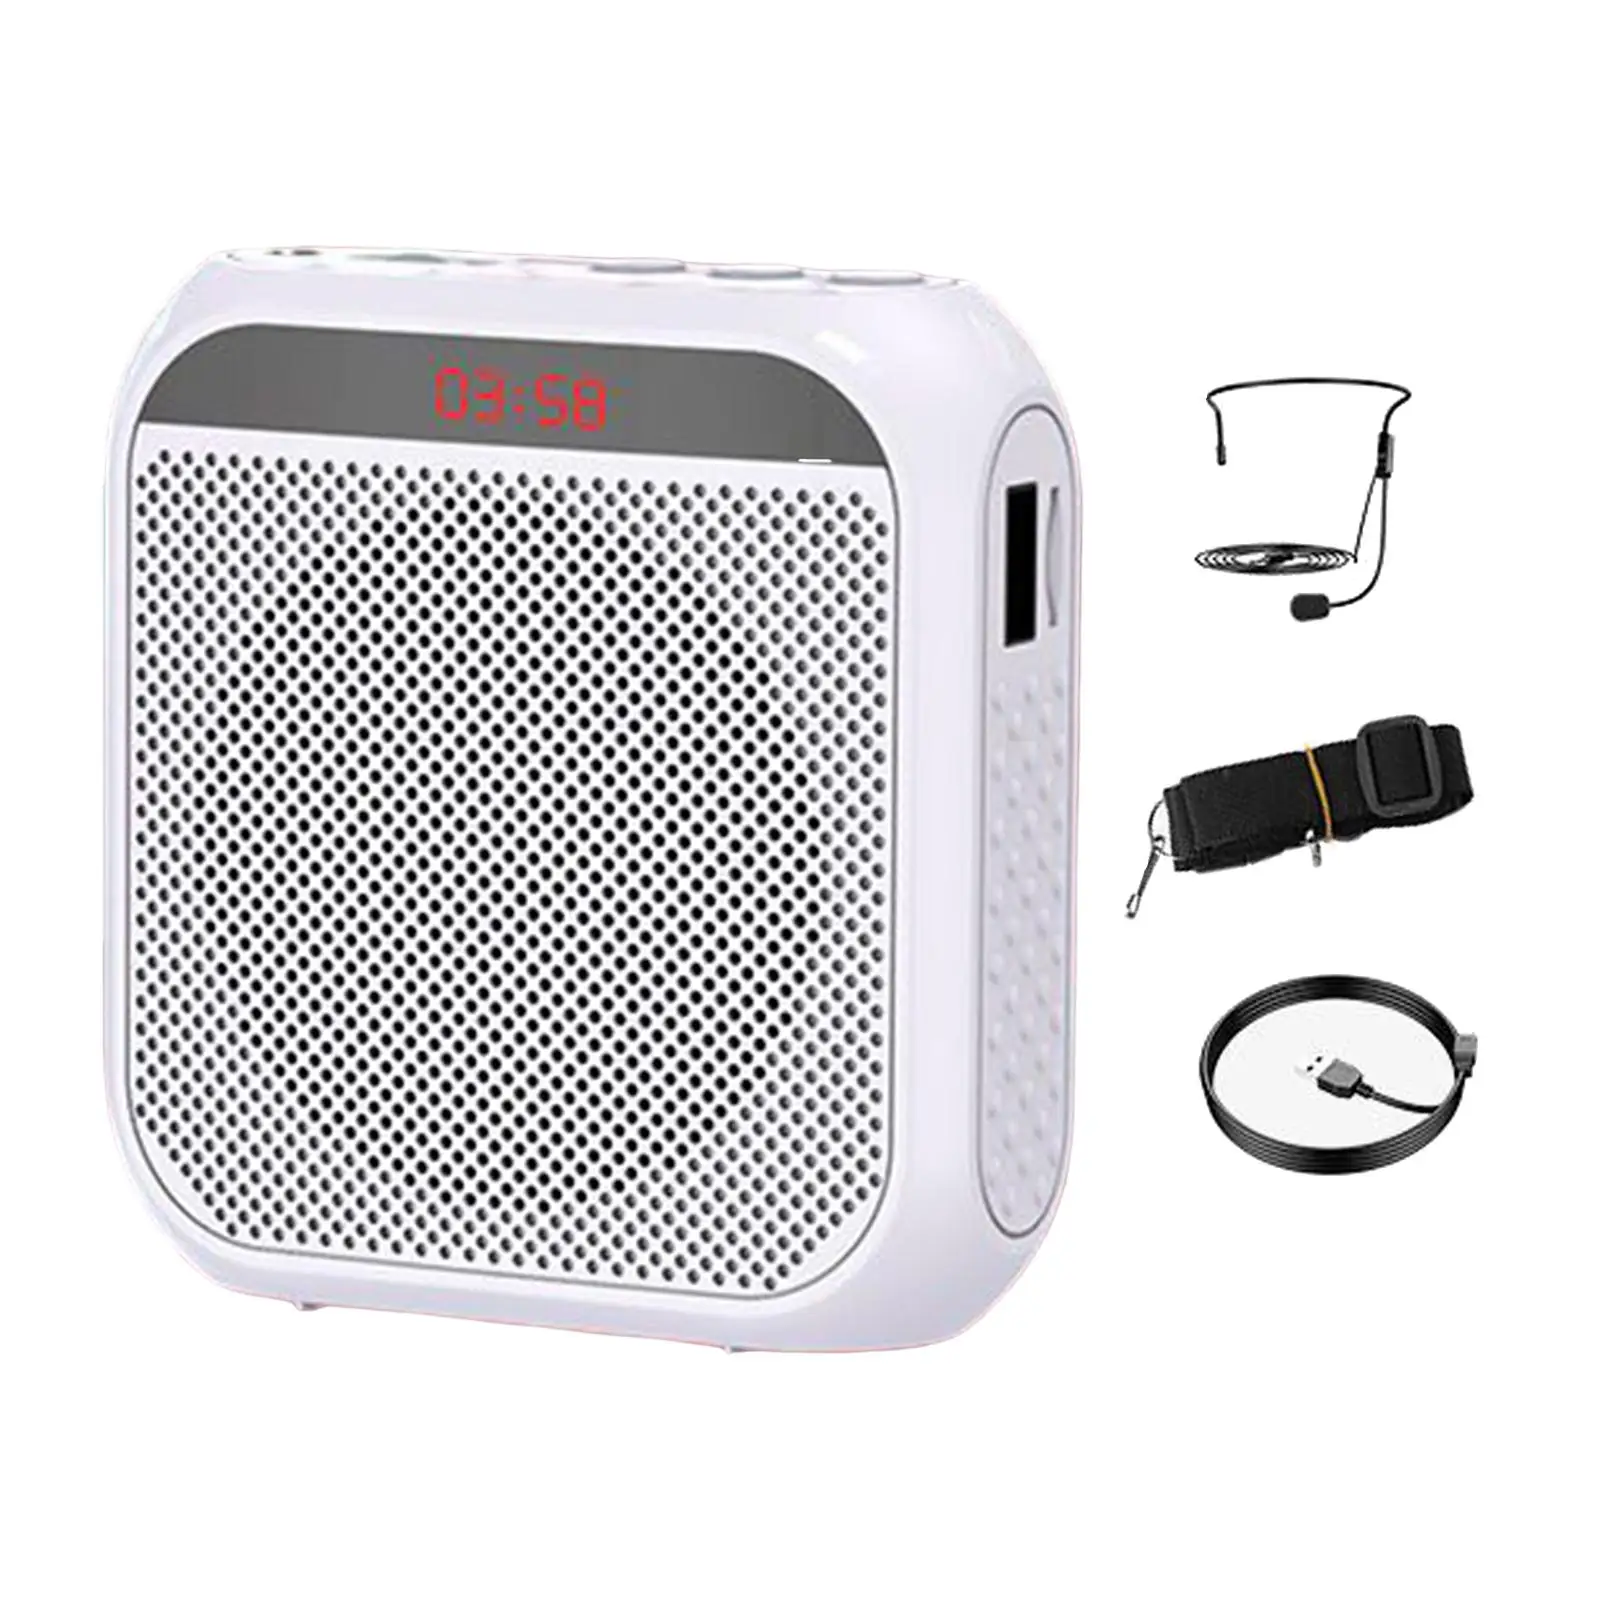 Portable Voice Amplifier Support TF Card U Disk 2200mAh Bluetooth Voice Amplifier for Games Classroom Coaches Singing Meeting